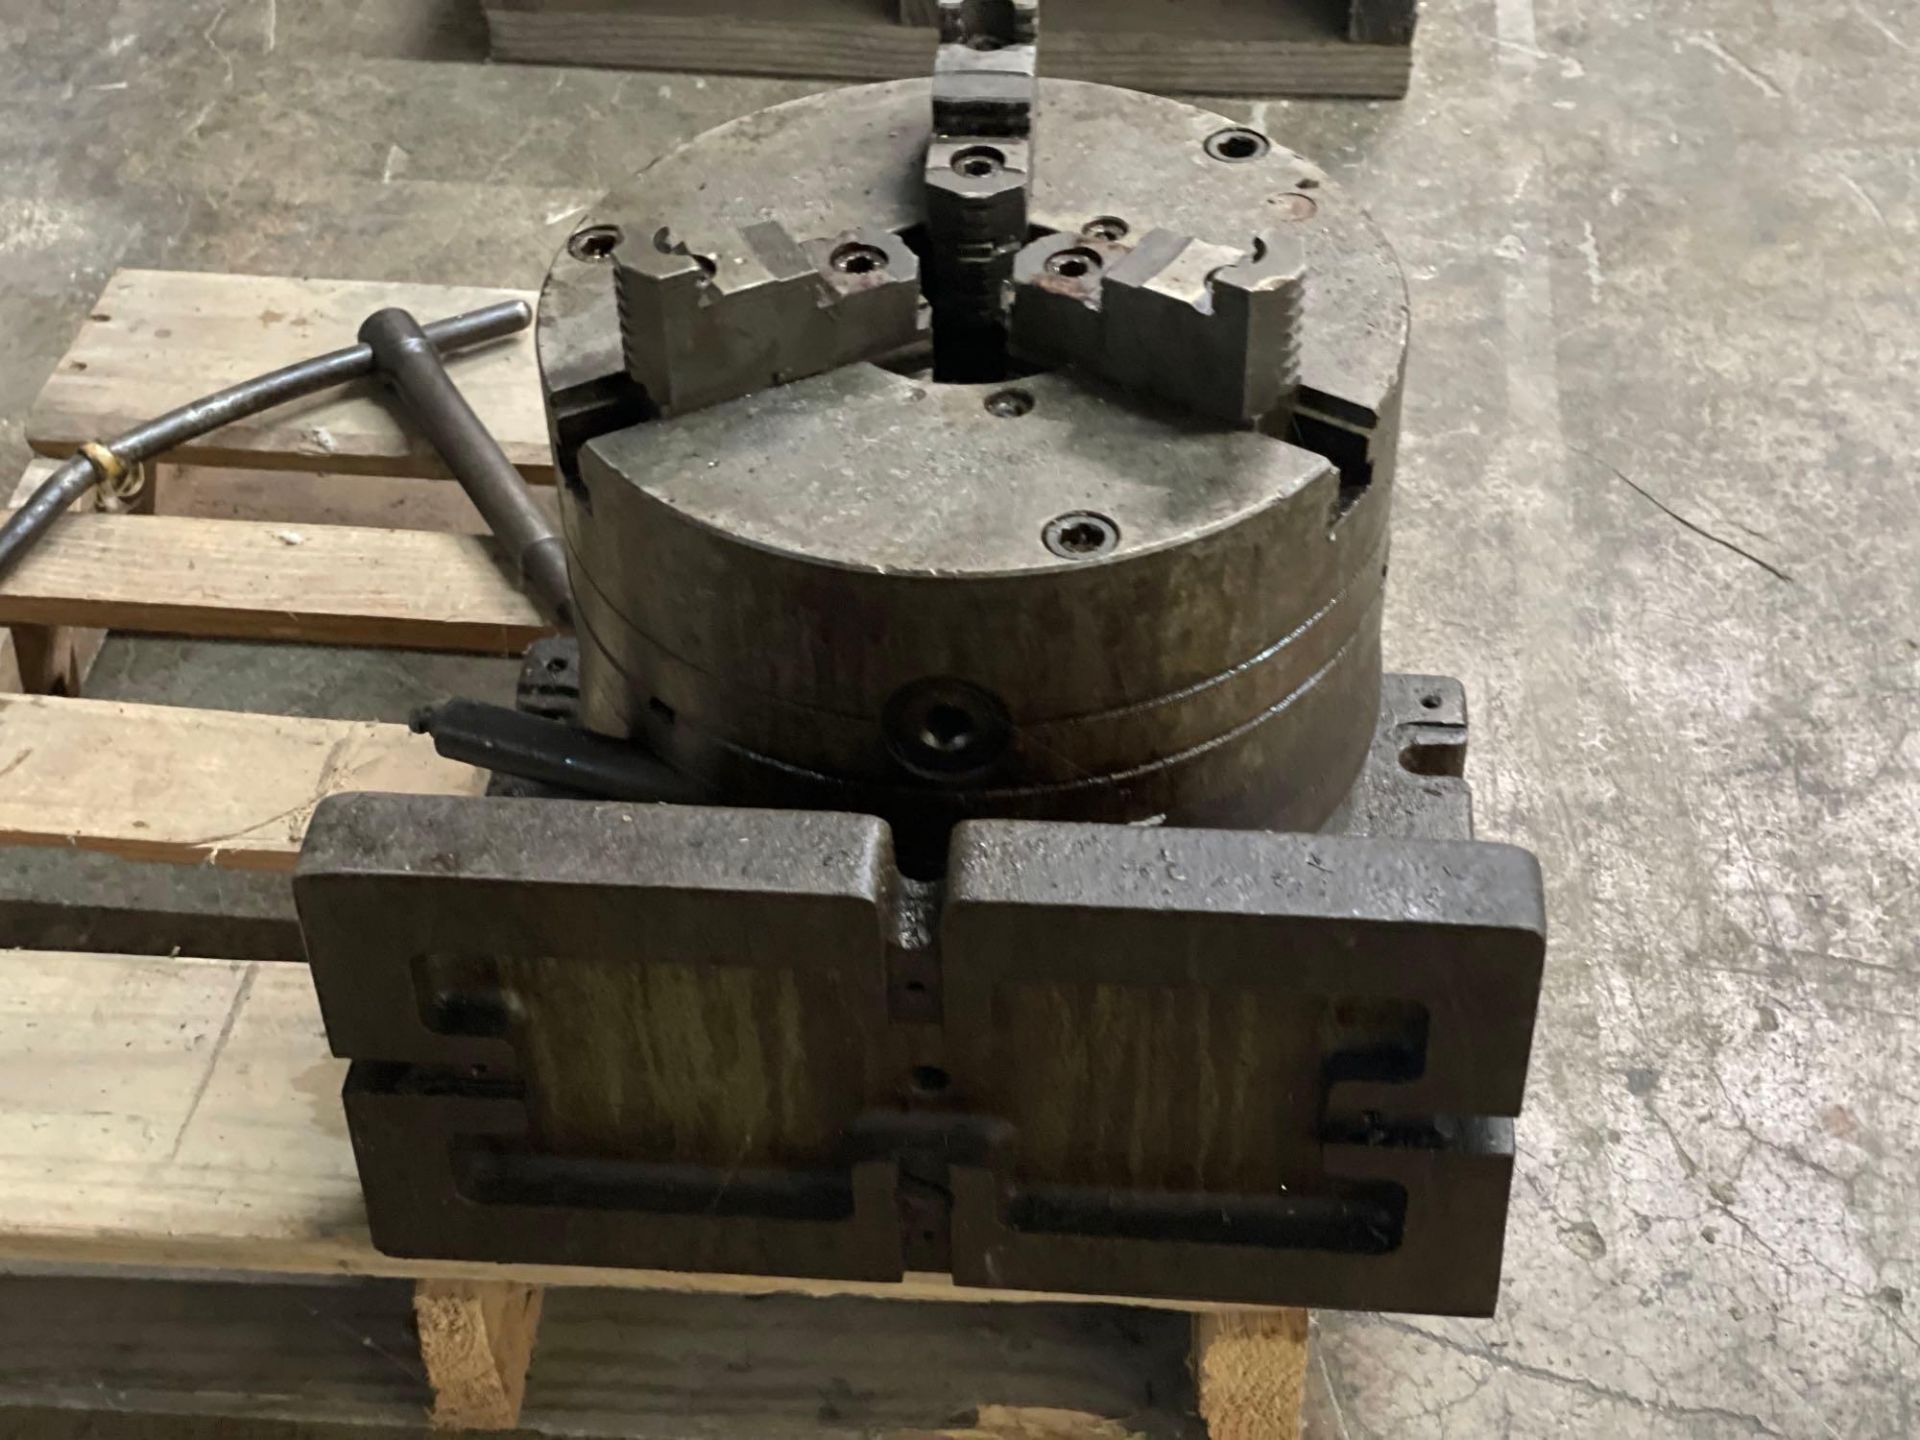 Horizontal and Vertical Mounting Rotary Table 12 1/2” 3 Jaw Chuck with 4” Thru Hole - Image 3 of 4